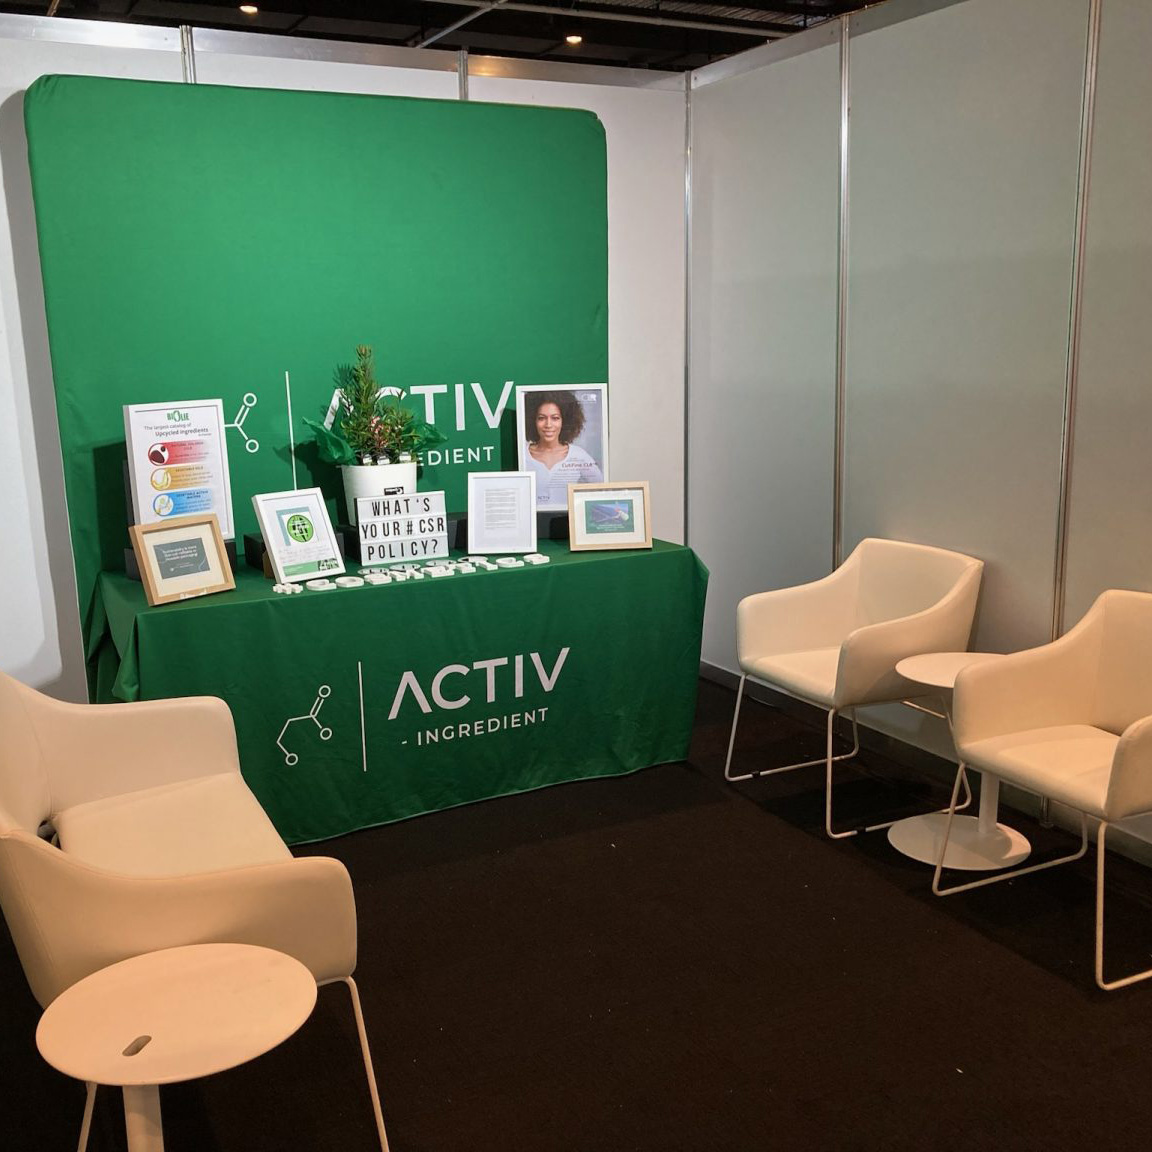 Booth #29 Activ-Ingredient at the ASCC 55th Annual Conference.